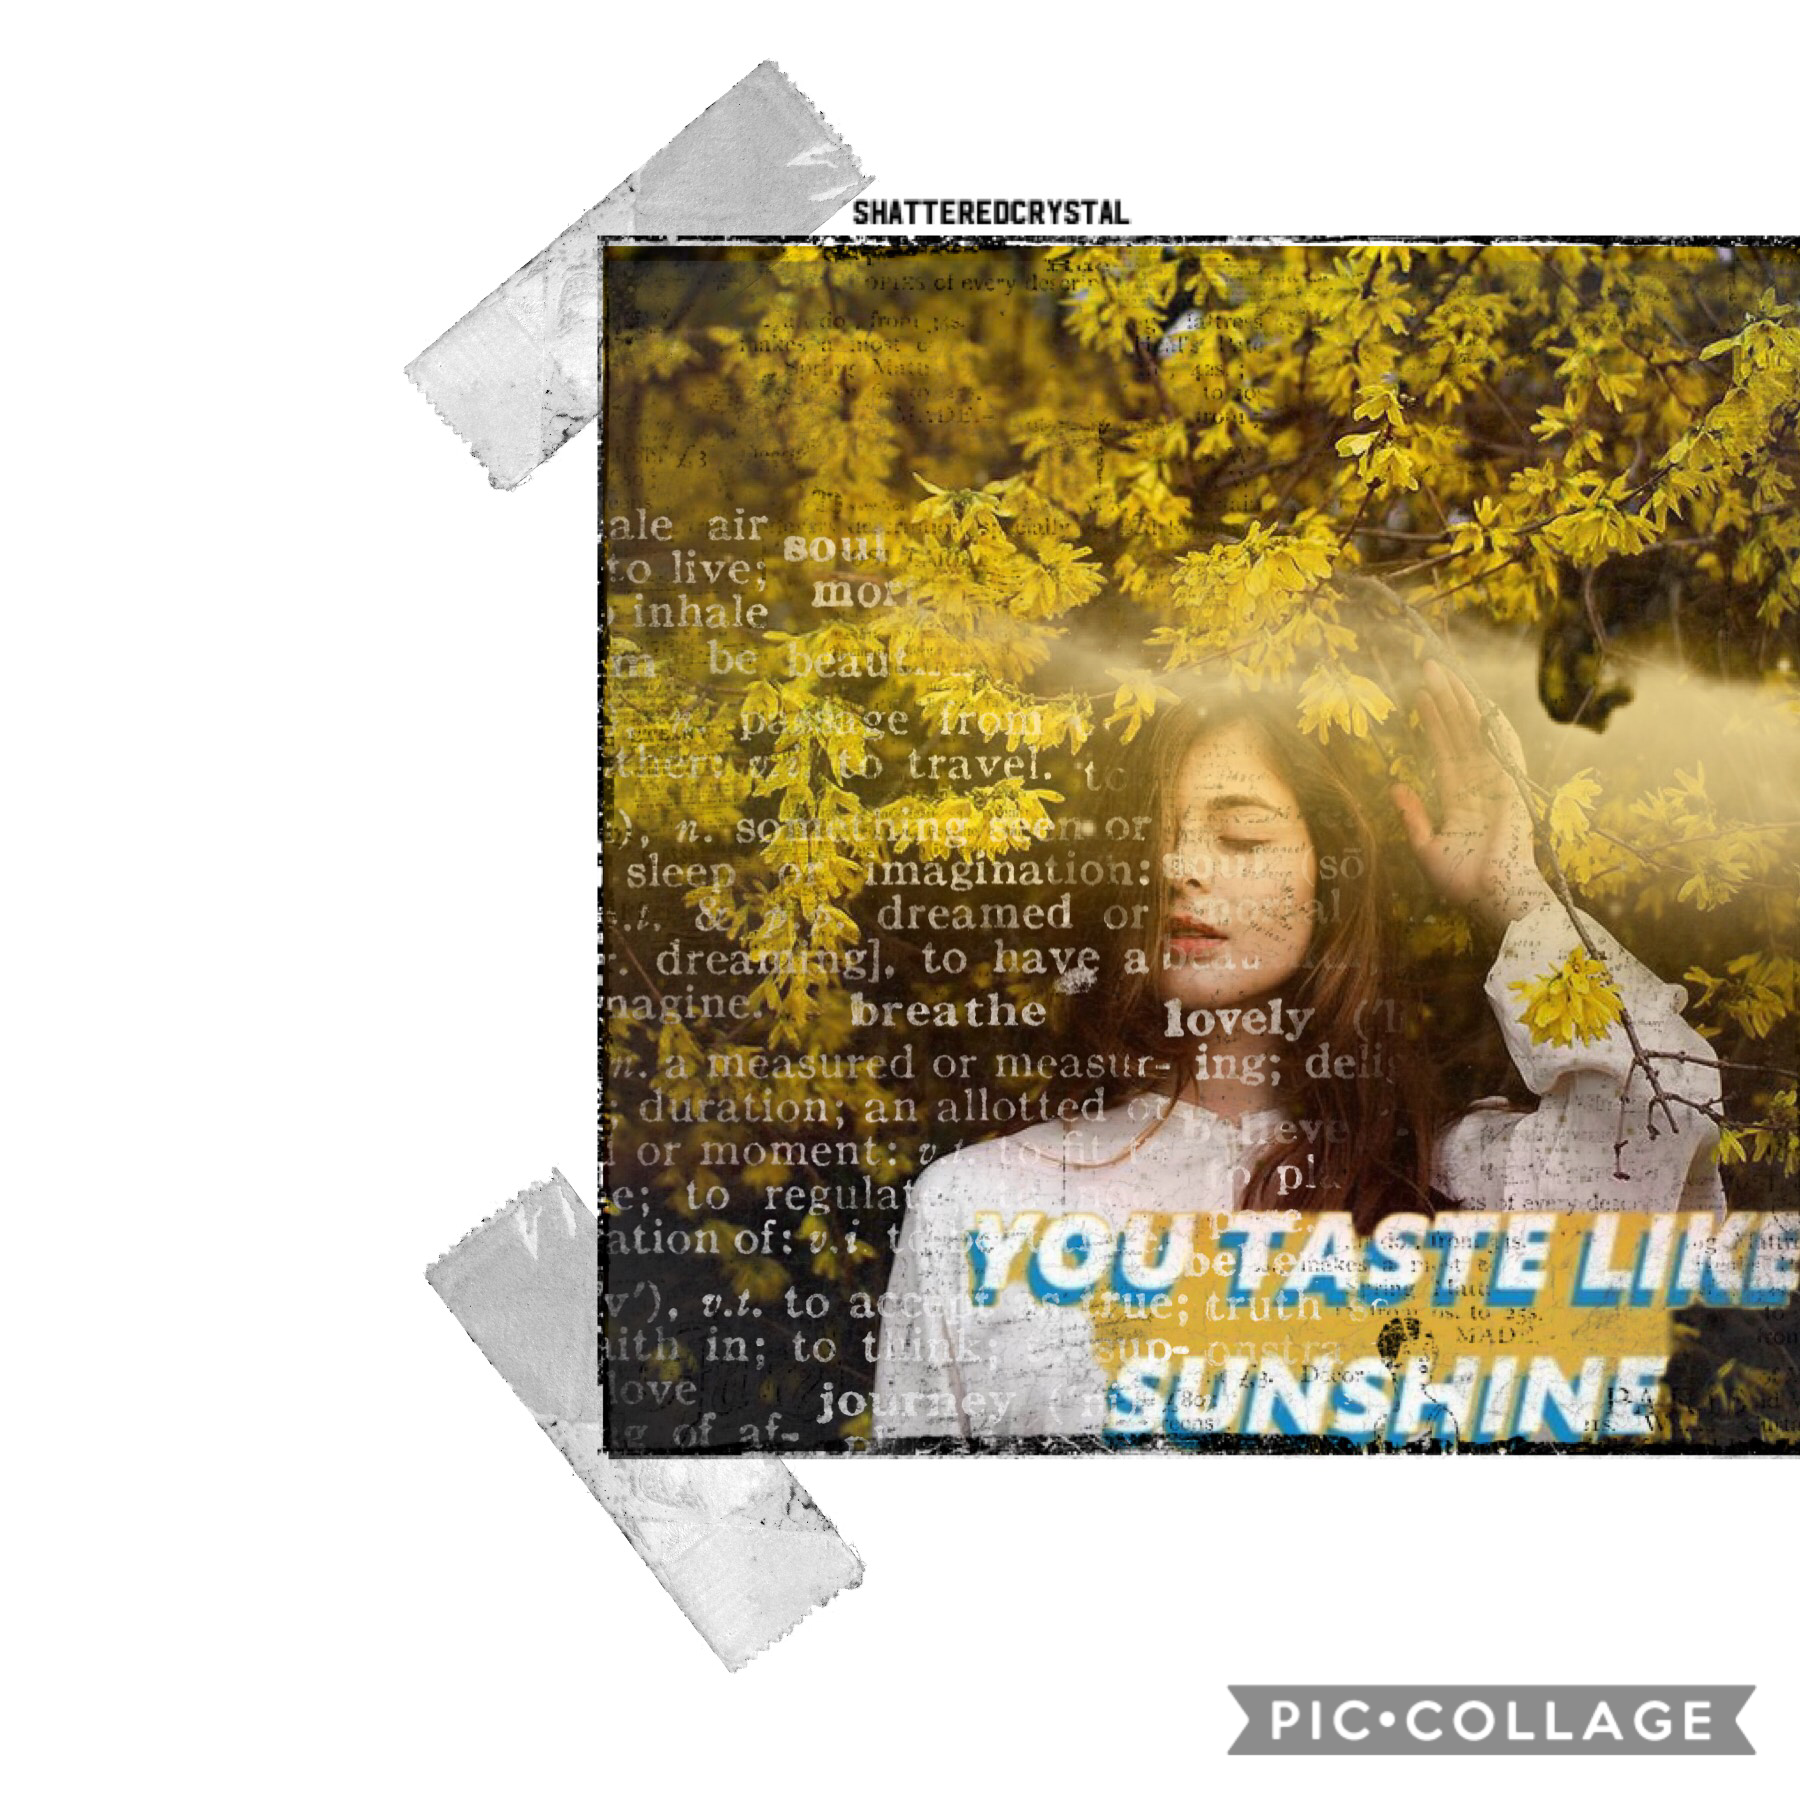 i made this a longgggg time ago and has just been in my collages😅💛☀️